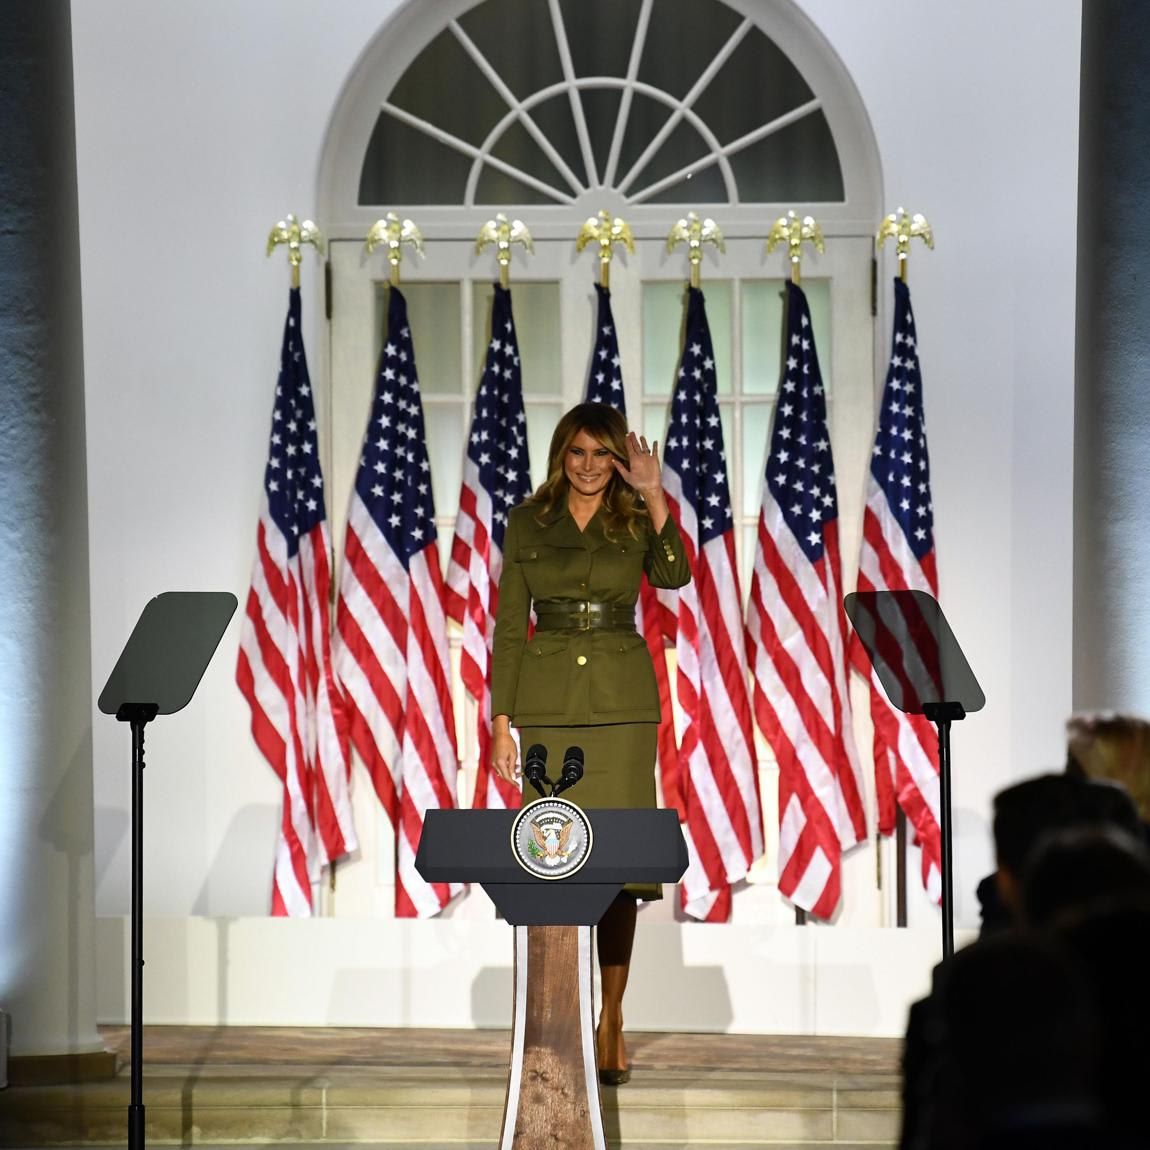 First Lady Melania Trump delivered her RNC speech from the White House Rose Garden on Aug. 25